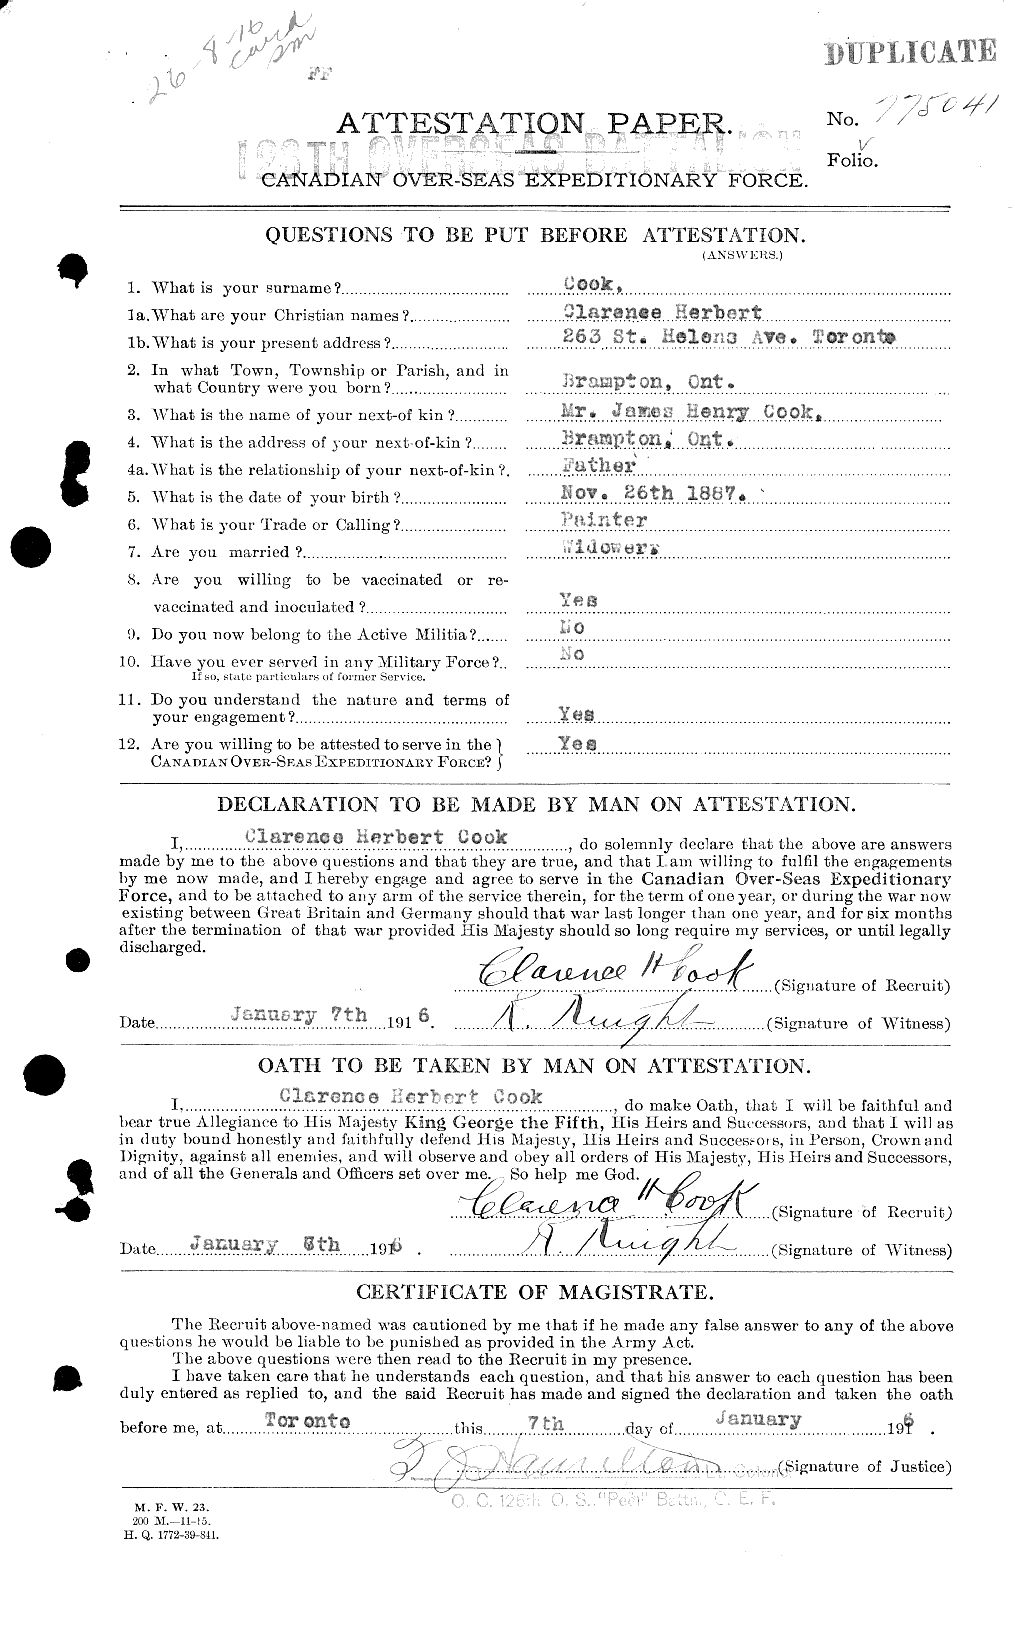 Personnel Records of the First World War - CEF 038716a